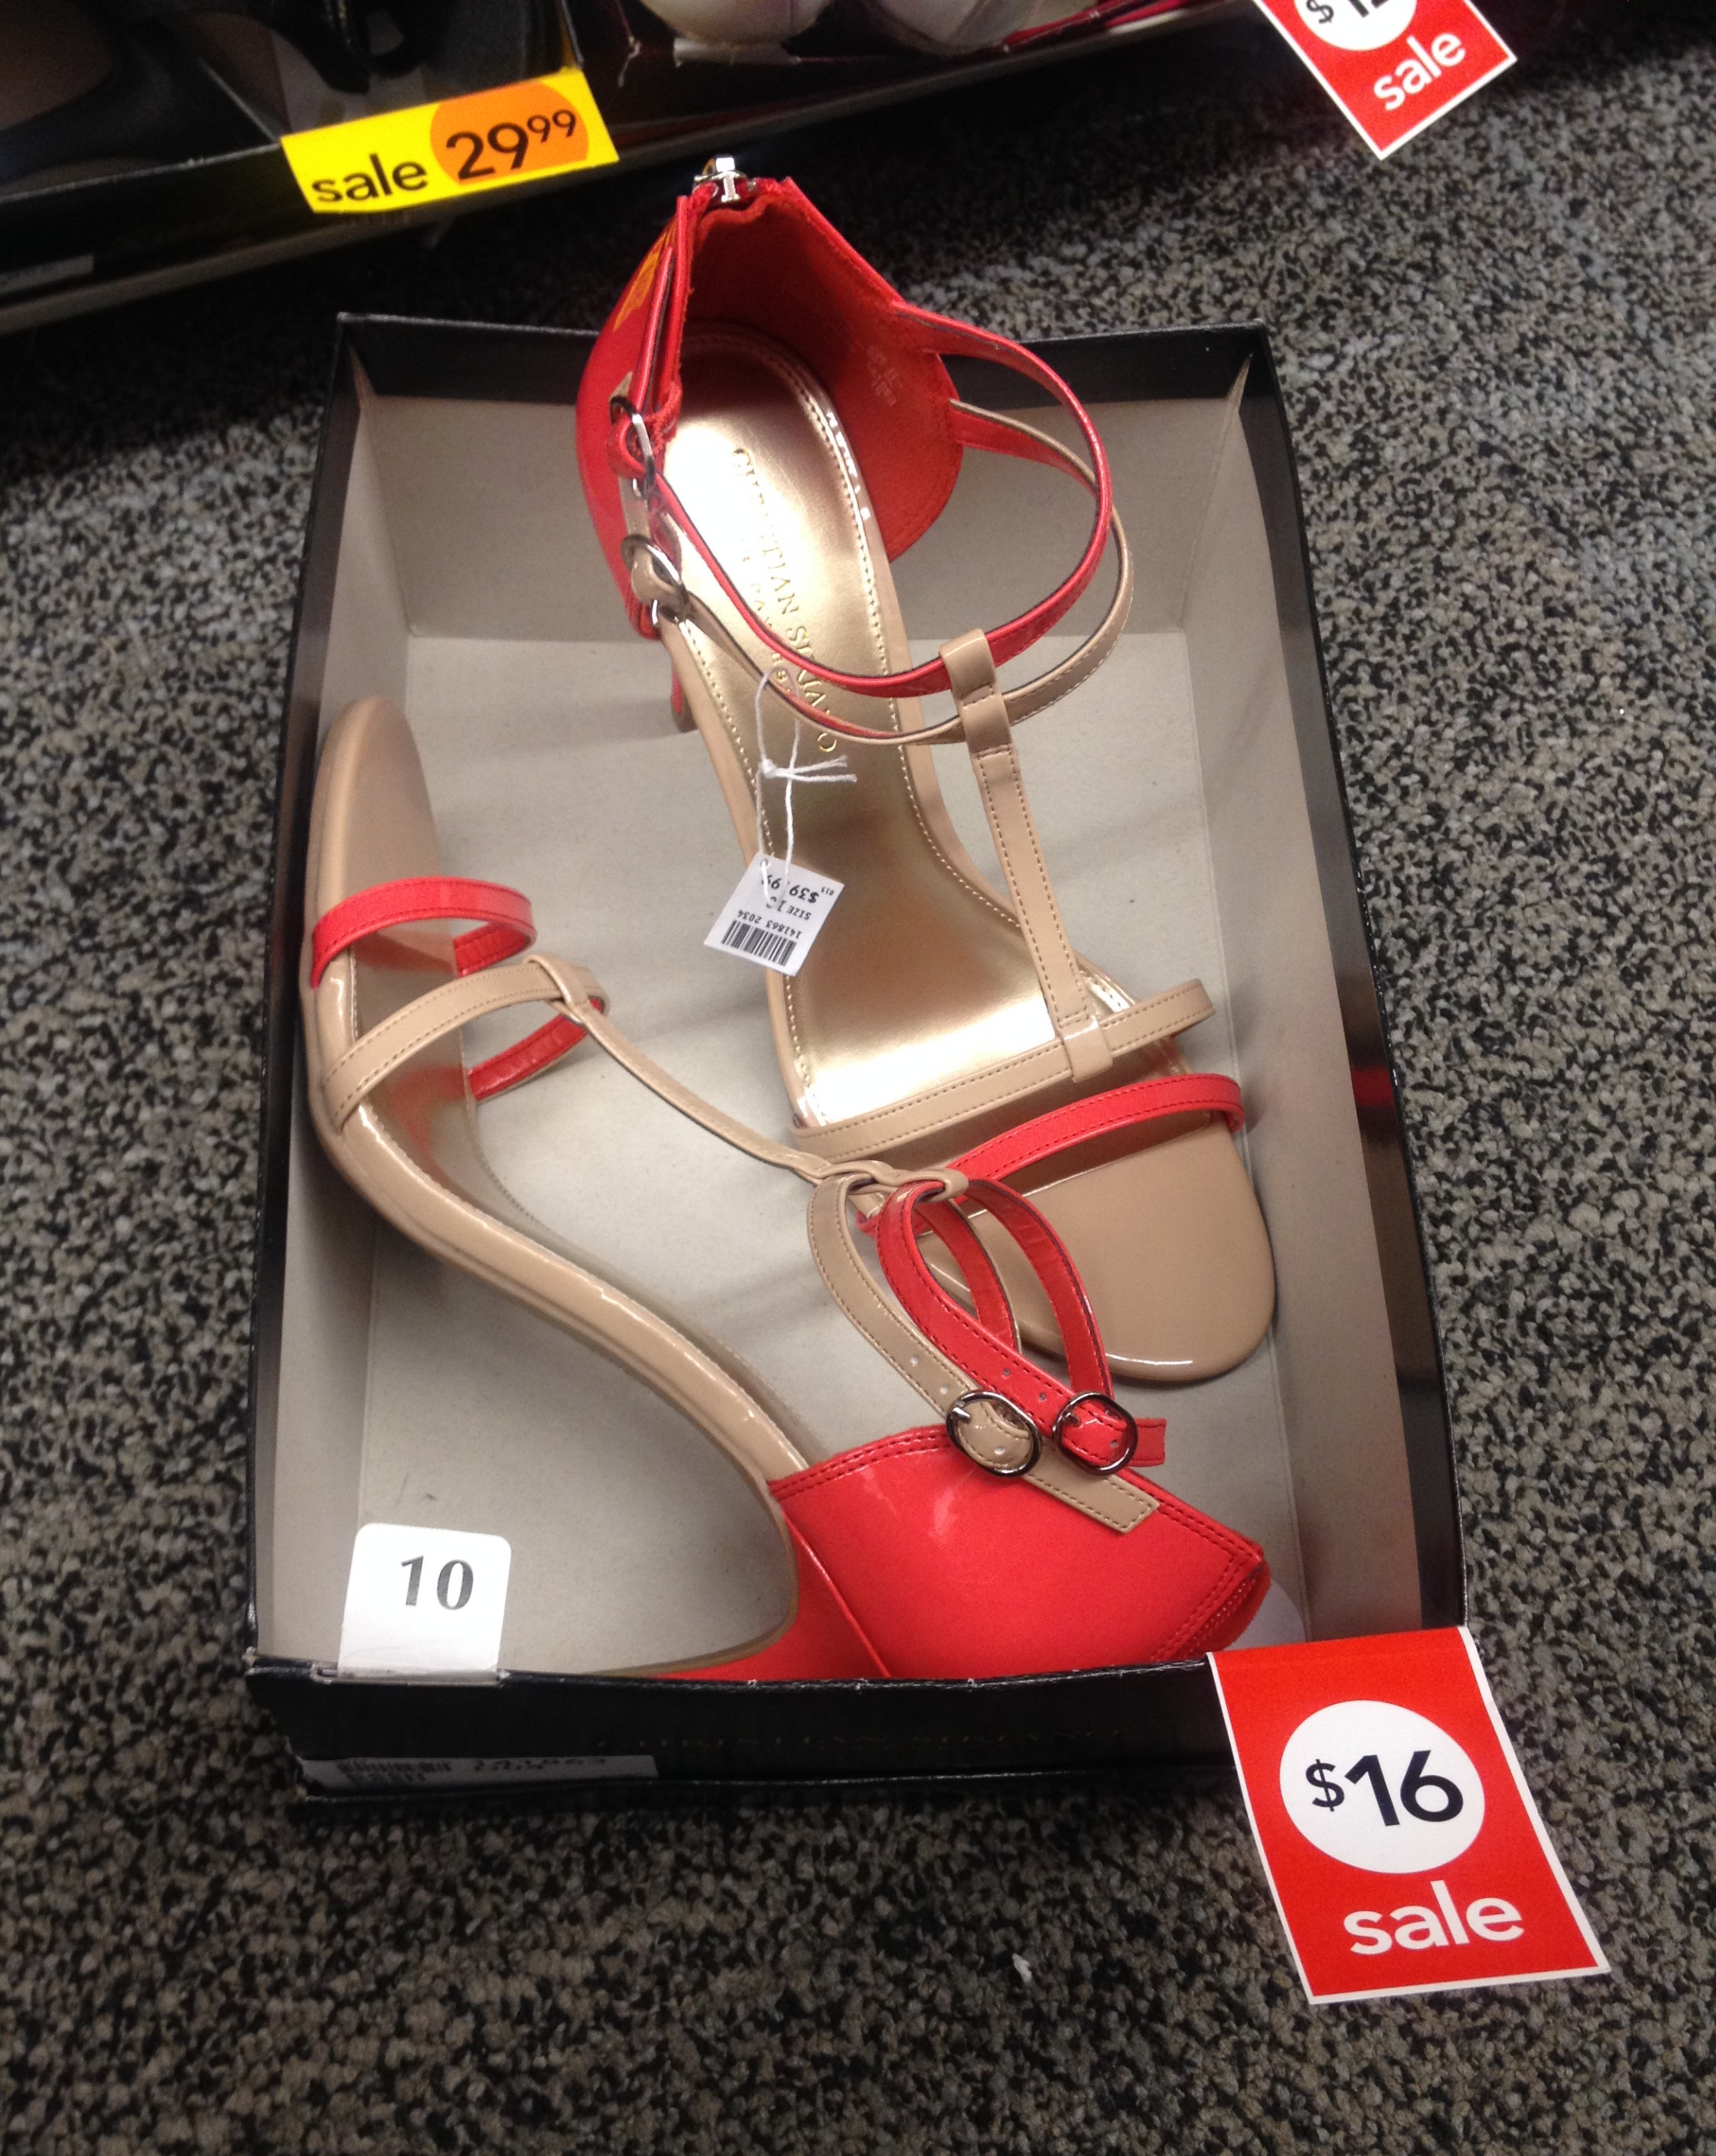 Affordable Summer Styles at Payless 